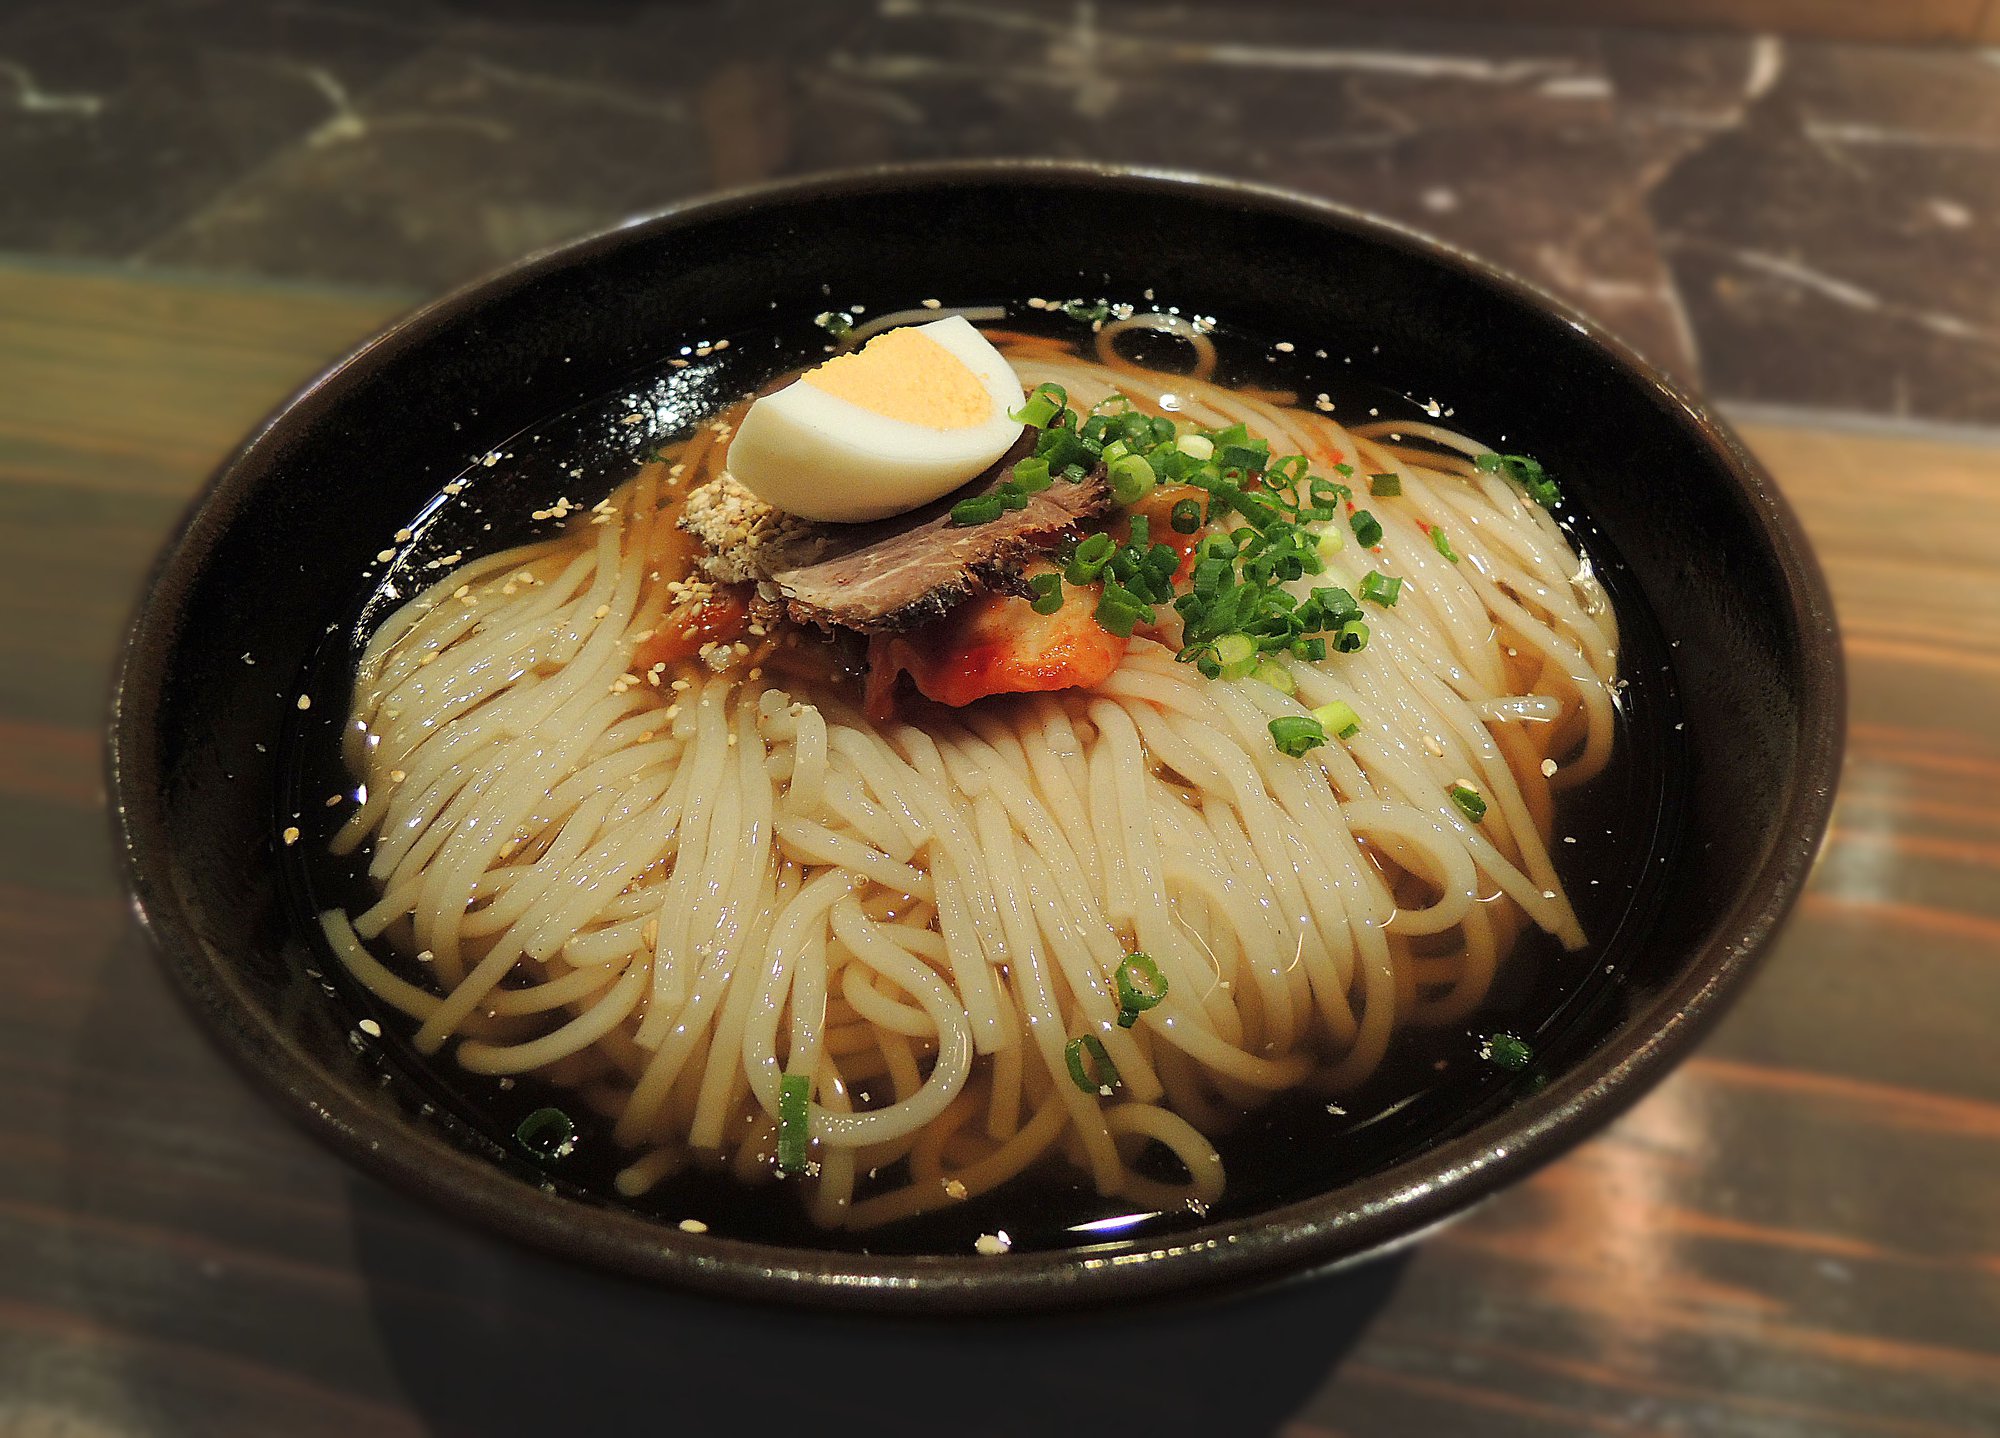 Ramen in Japan is almost a religion as there are so many heavenly varieties and top chefs.